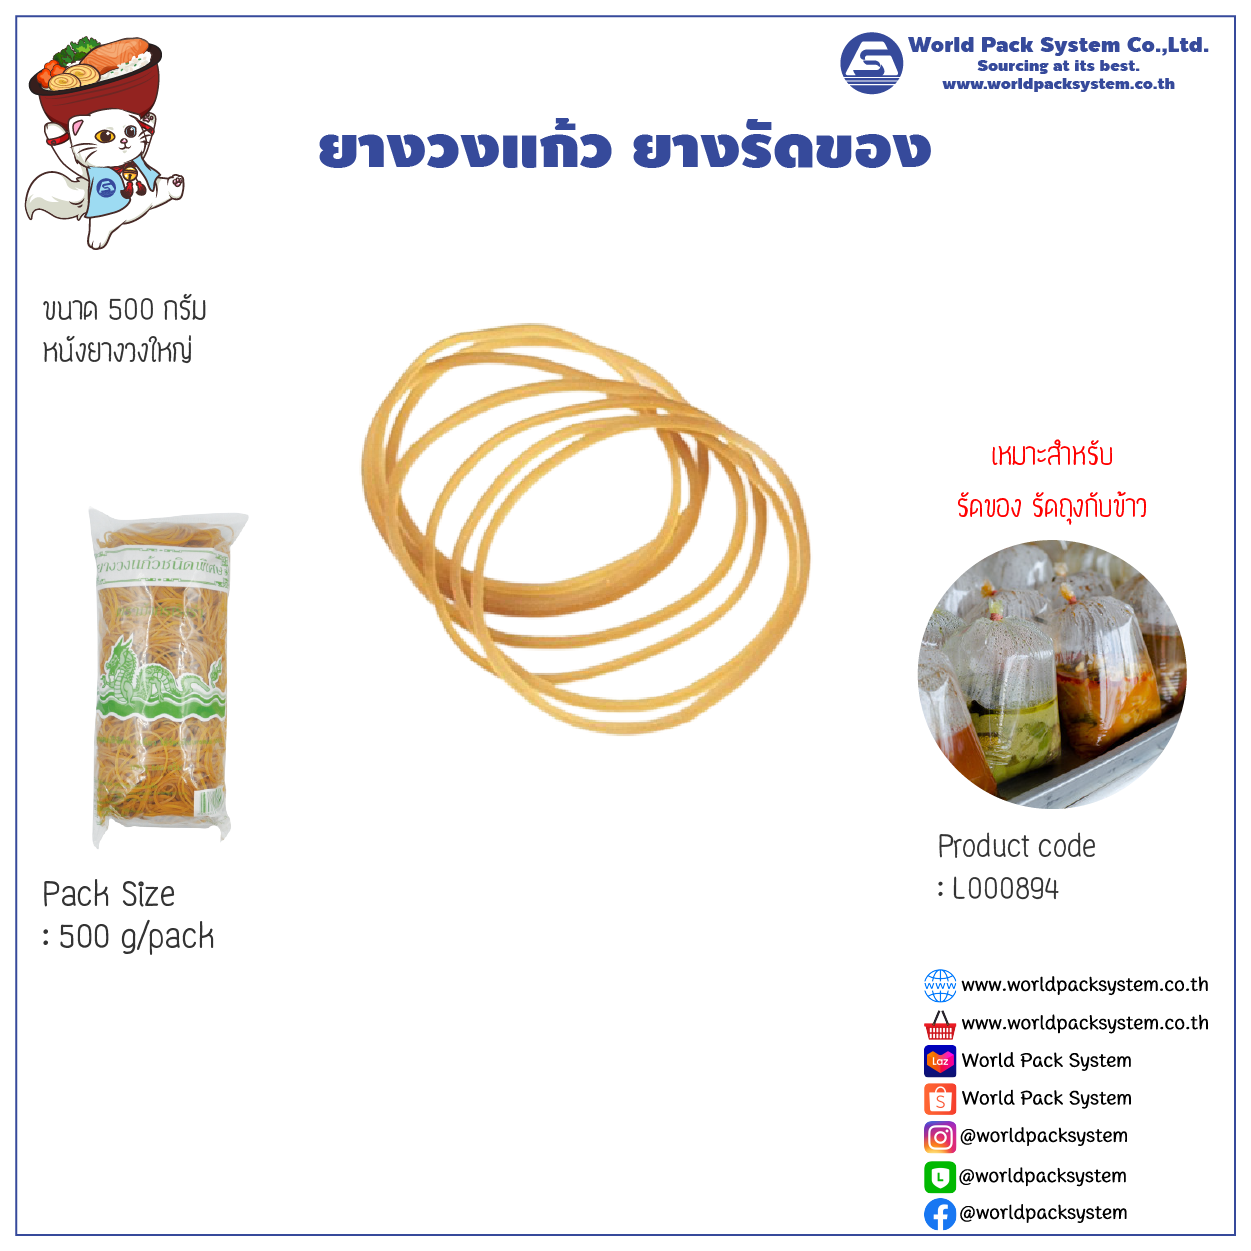 Rubber band Big size 500 g.